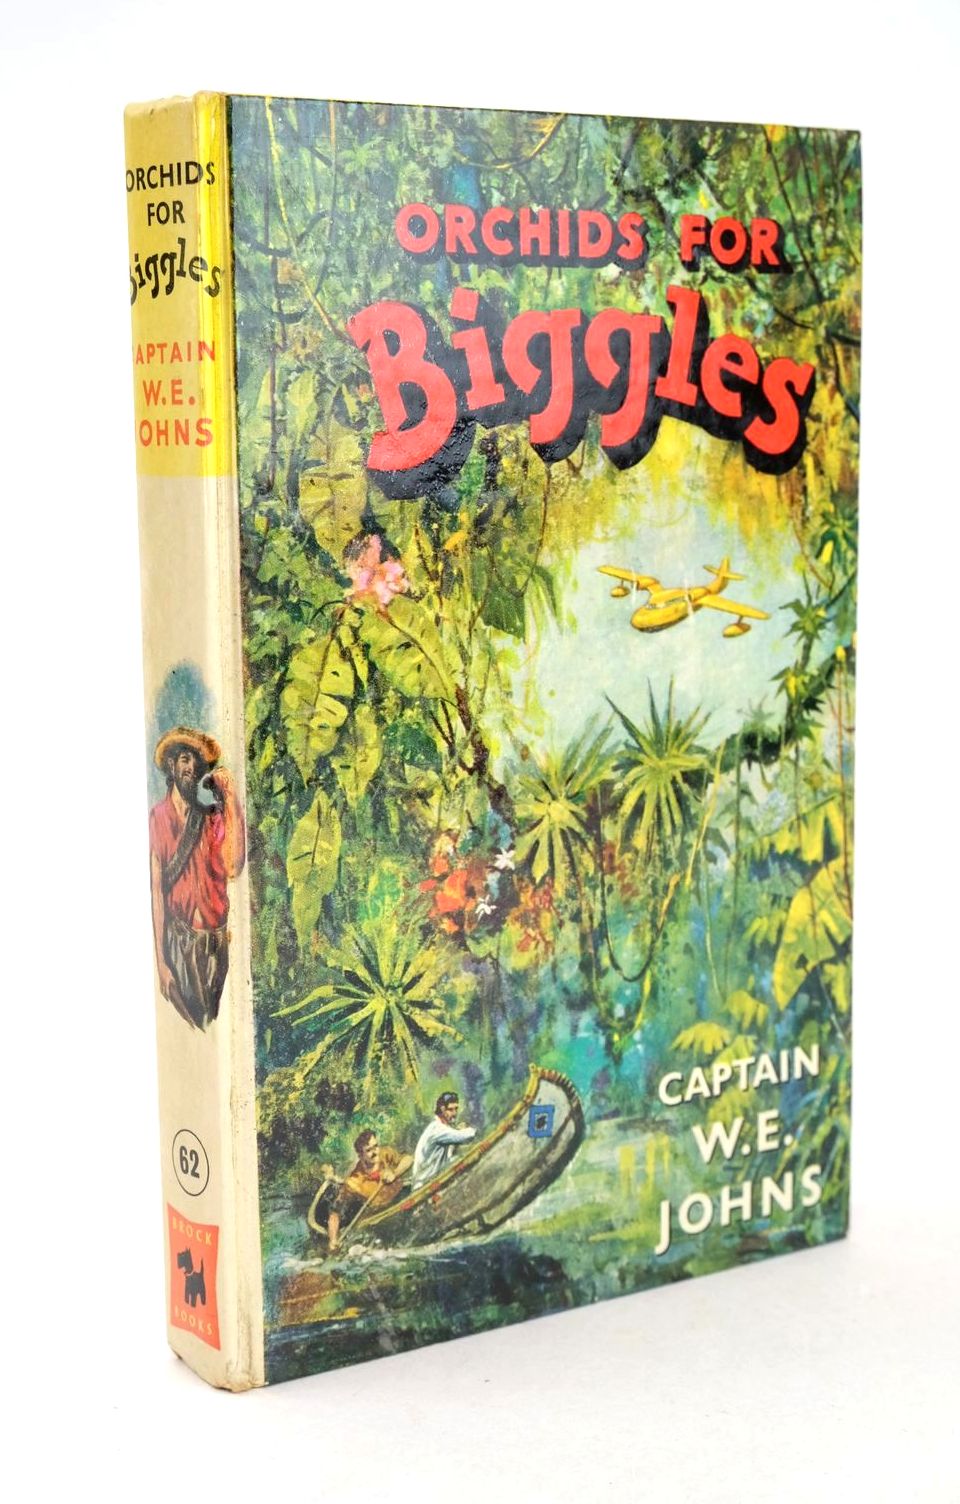 Photo of ORCHIDS FOR BIGGLES written by Johns, W.E. illustrated by Stead, Leslie published by Brockhampton Press Ltd. (STOCK CODE: 1326020)  for sale by Stella & Rose's Books